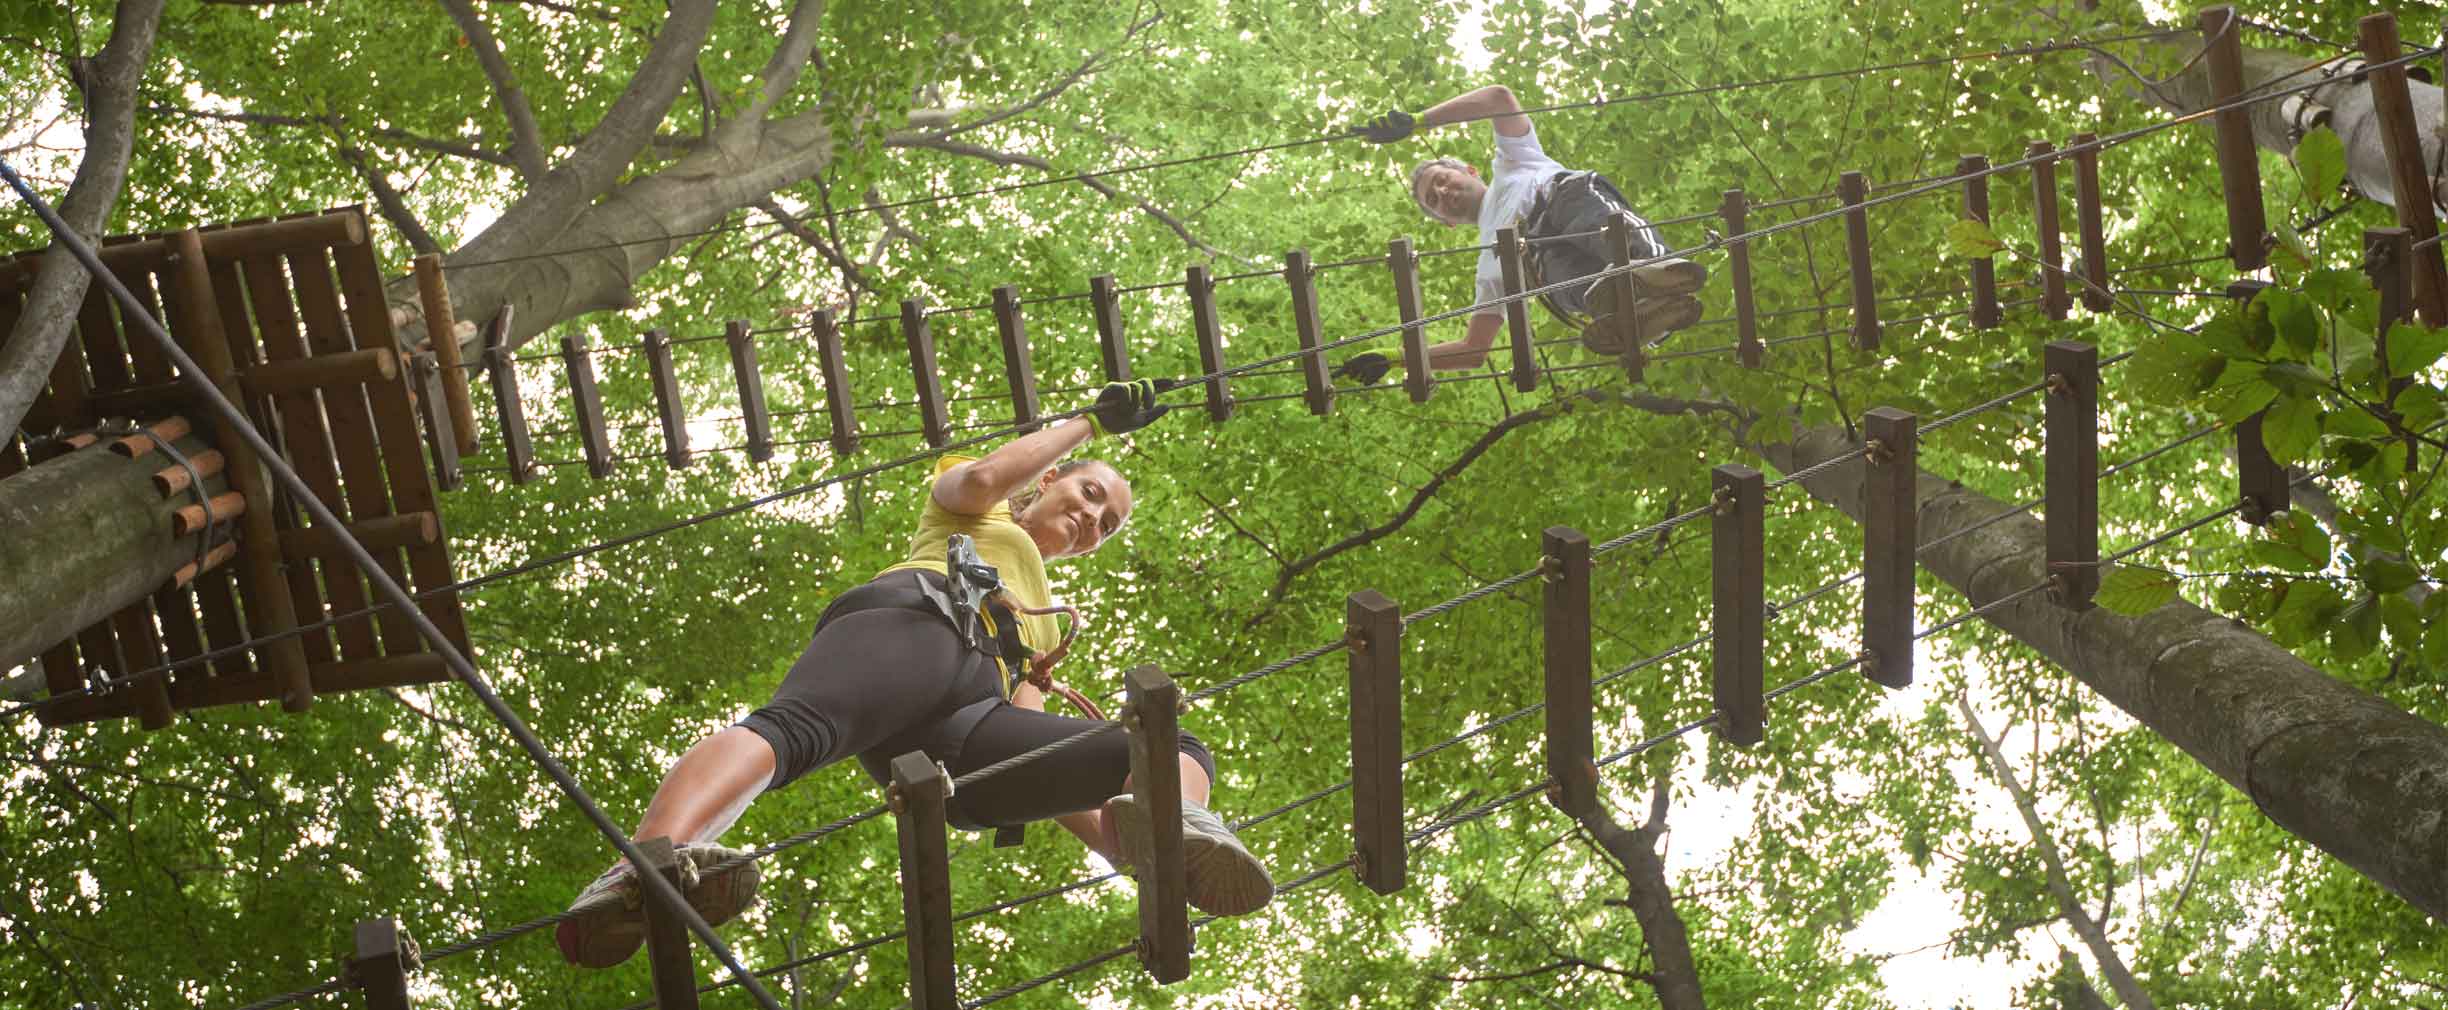 walking across a ropes course with a safety net